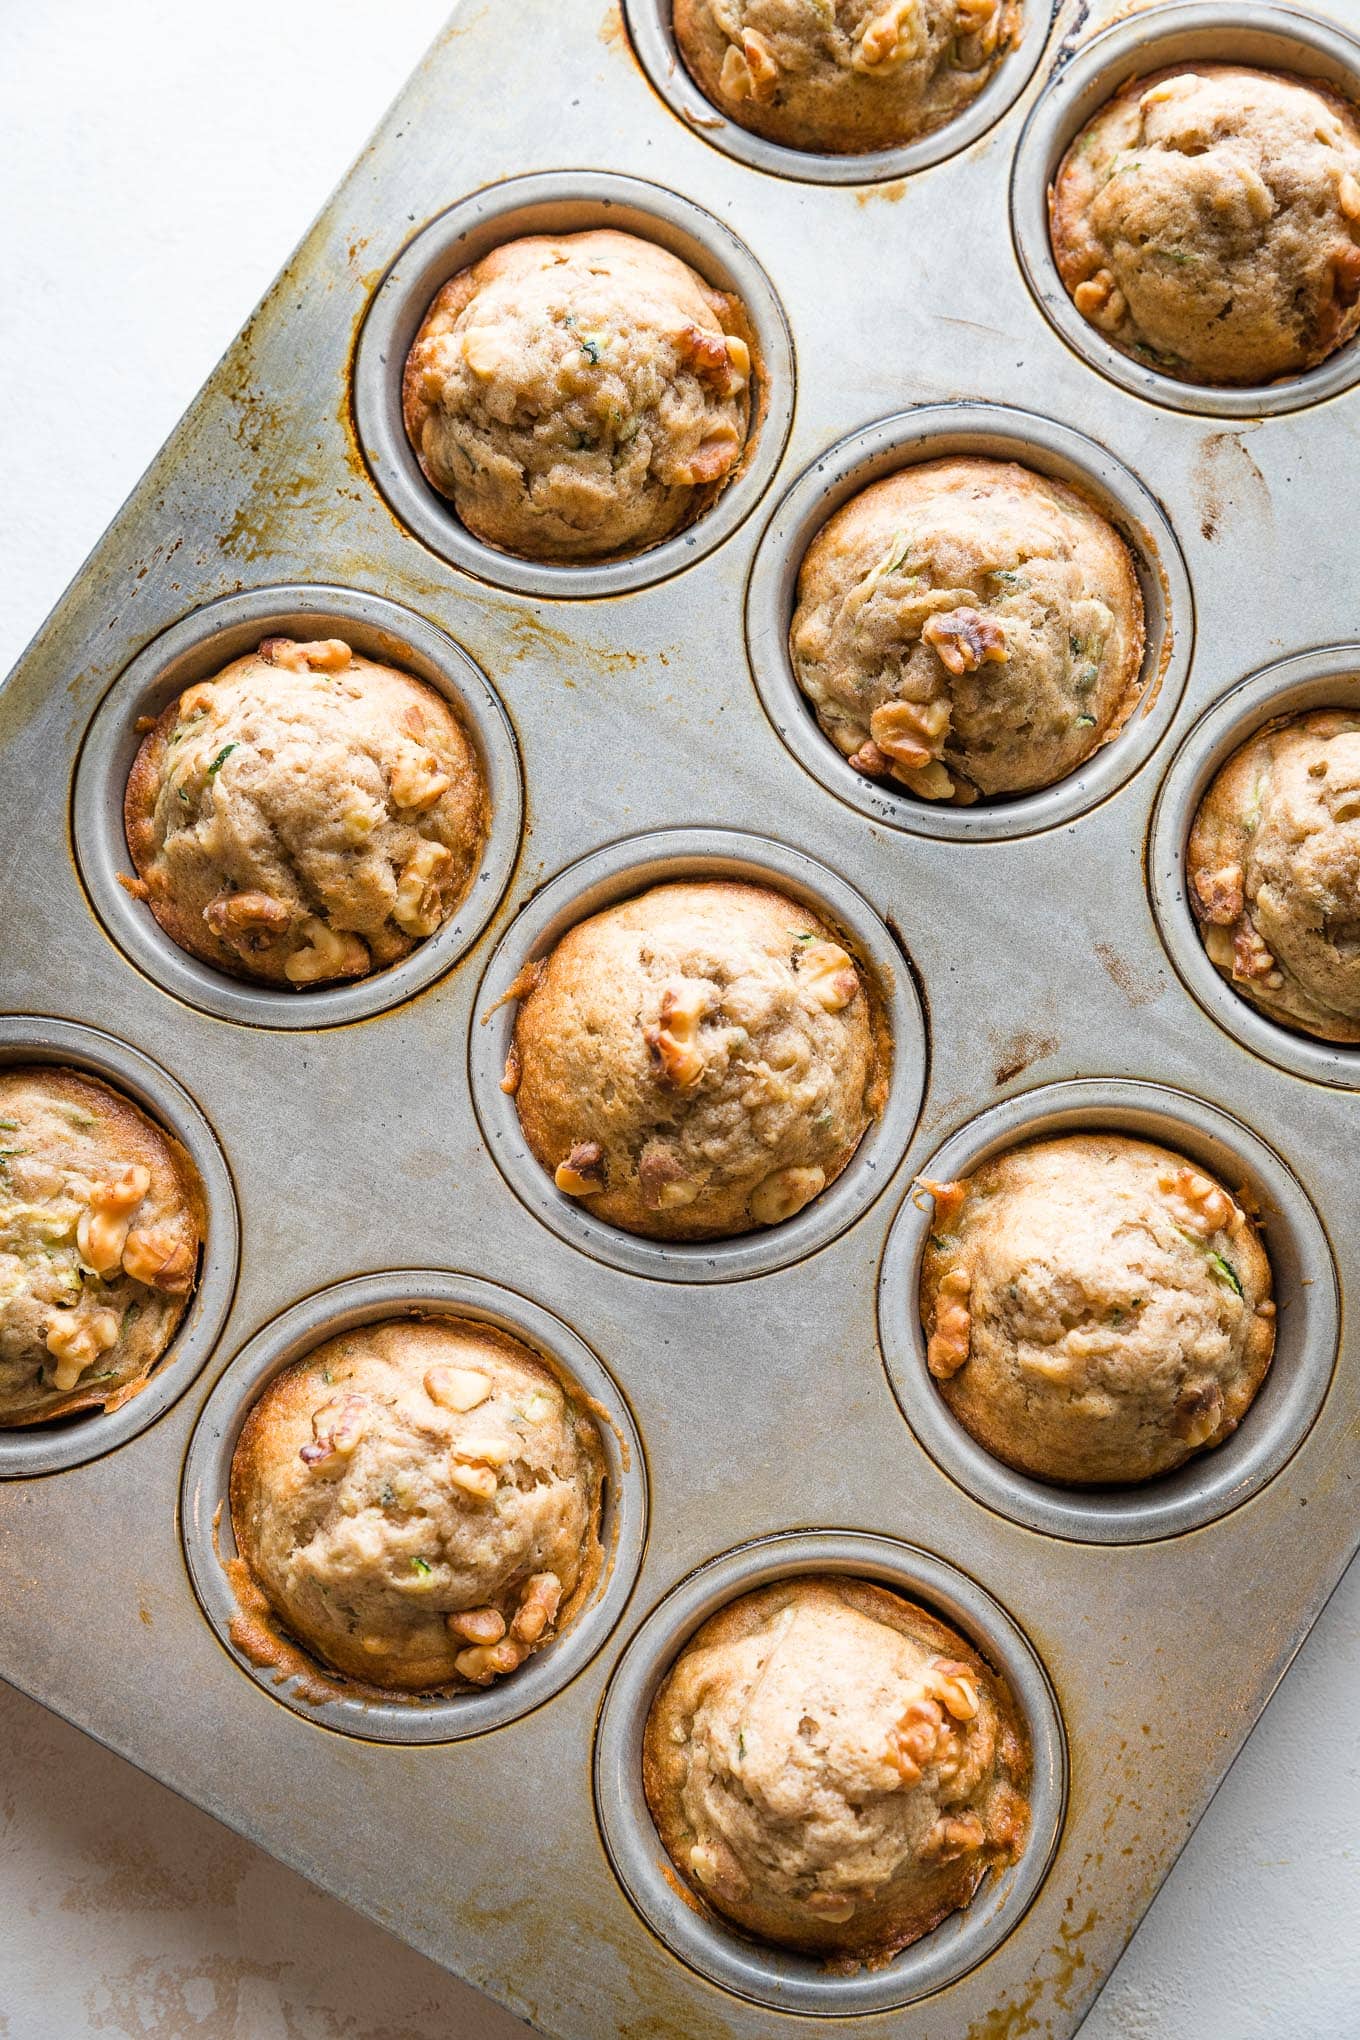 Just baked banana zucchini muffins, still in the muffin pan to cool.